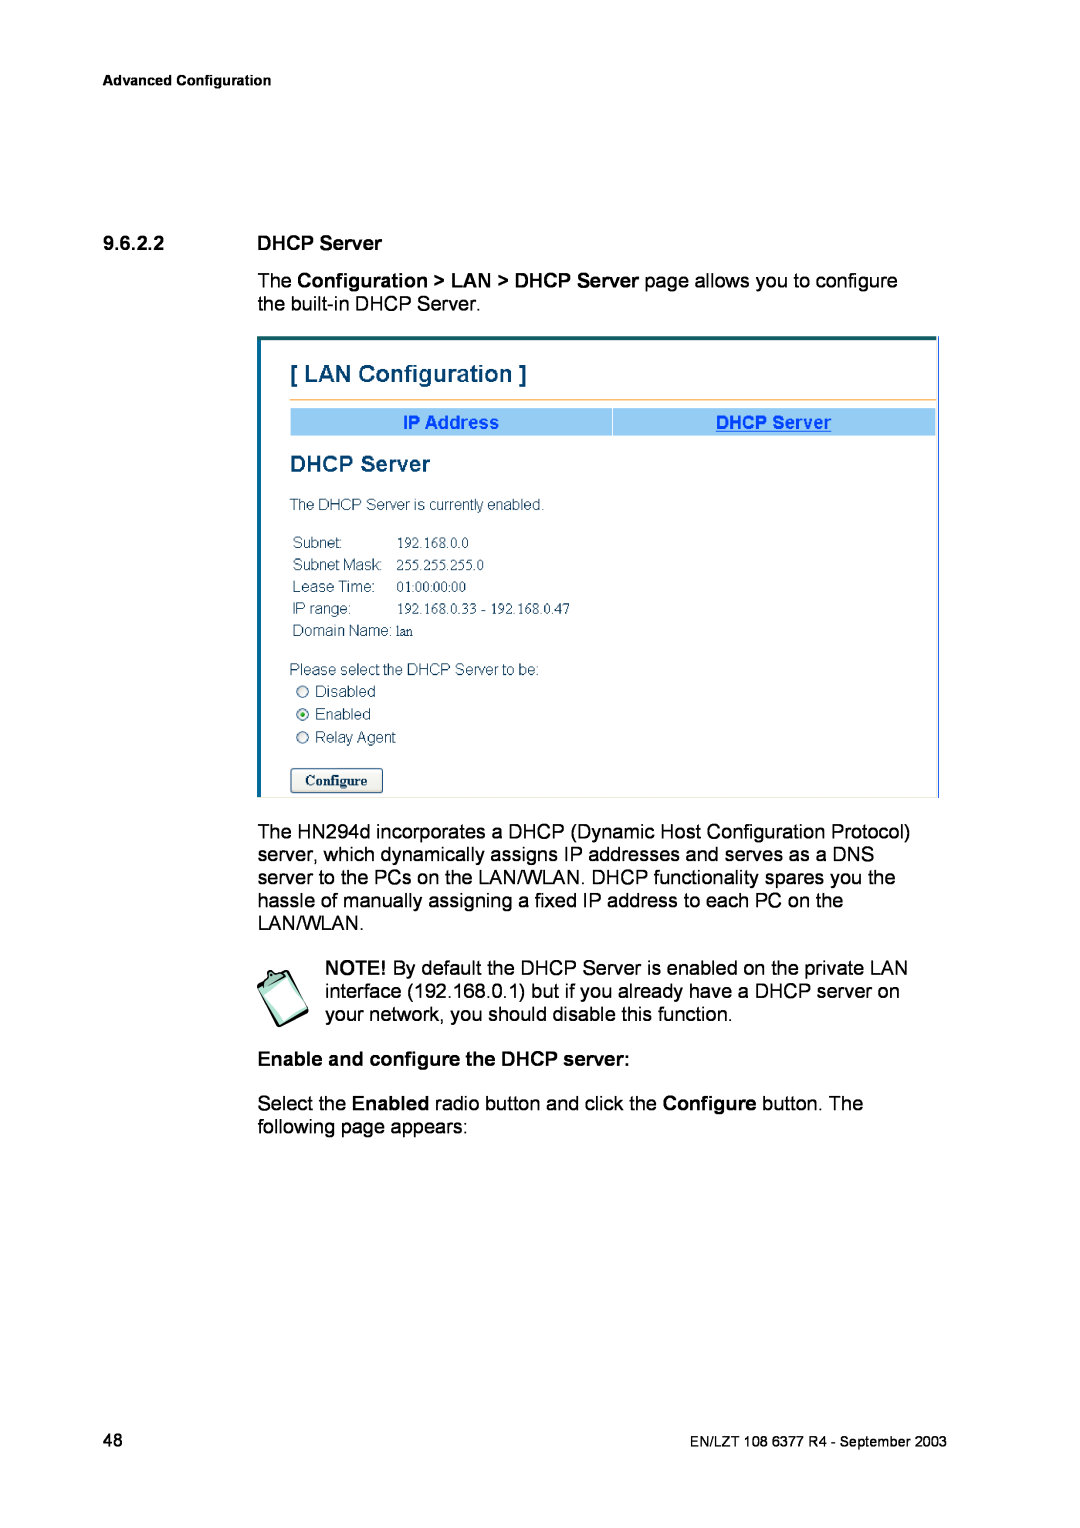 Garmin HN294DP/DI manual DHCP Server, Enable and configure the DHCP server 